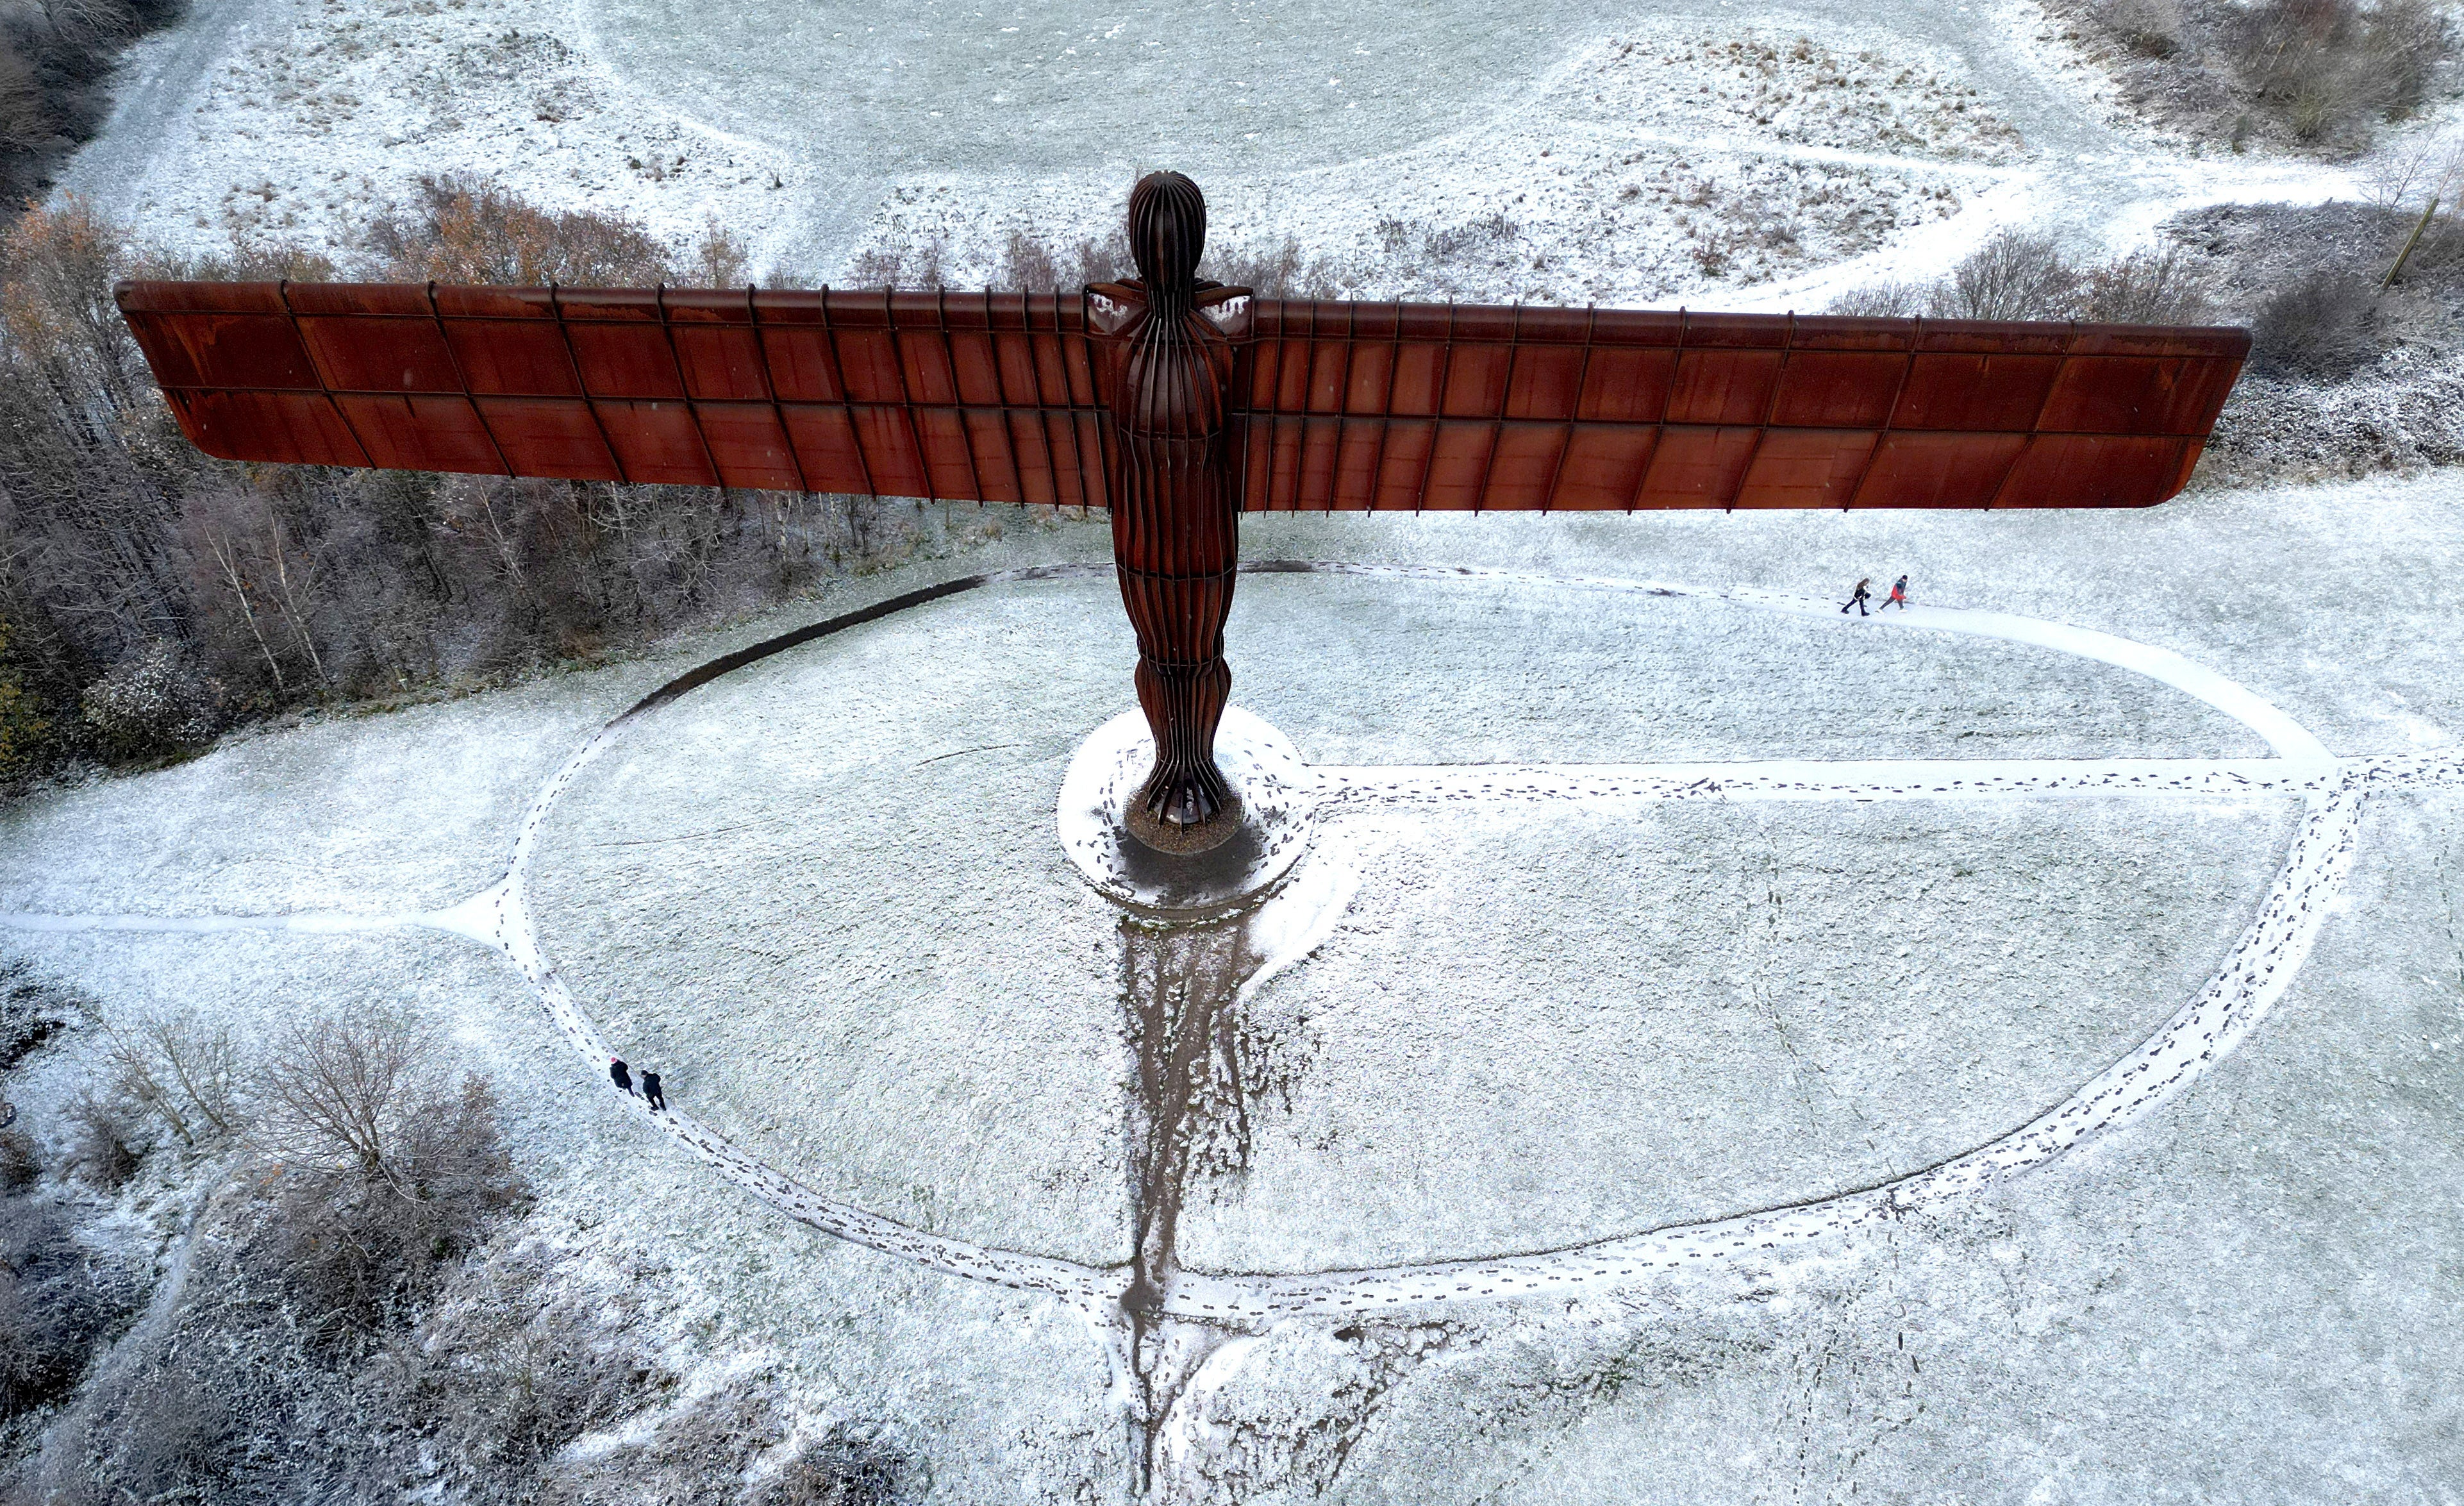 The ‘Angel of the North’ is arguably the UK’s most famous piece of public art